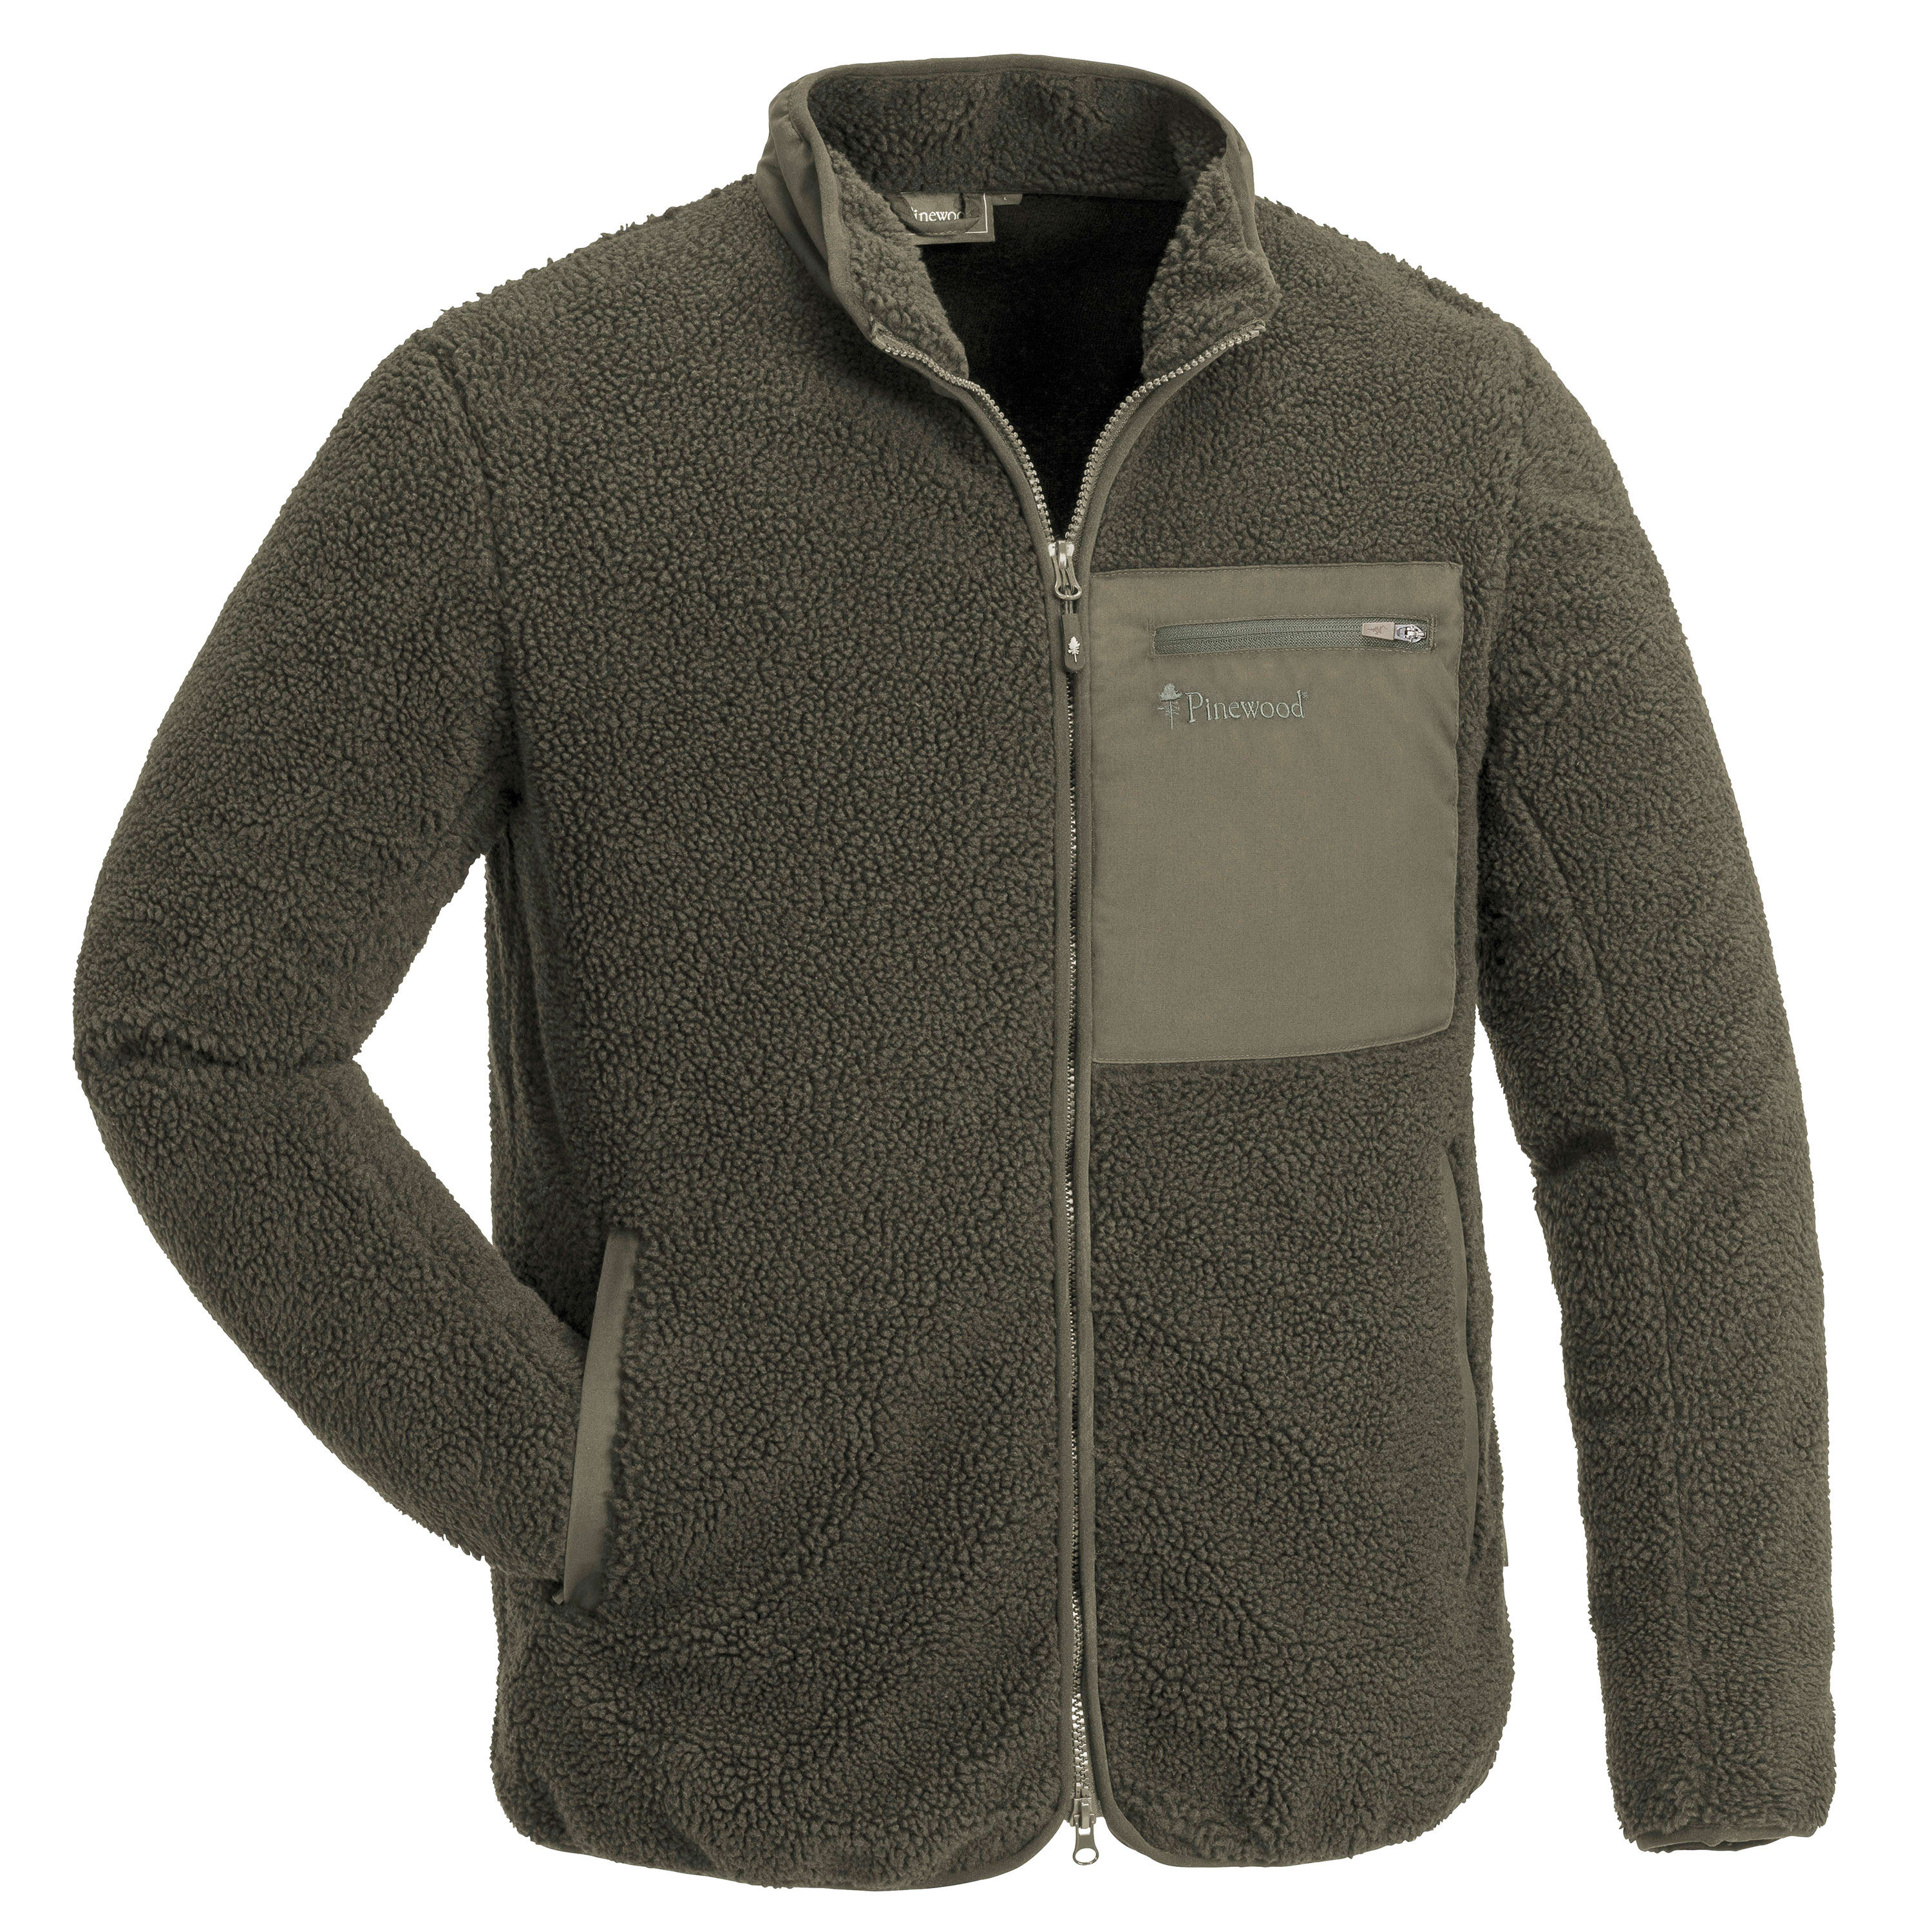 Buy Pinewood Men's Pinewood Pile Jacket from Outnorth